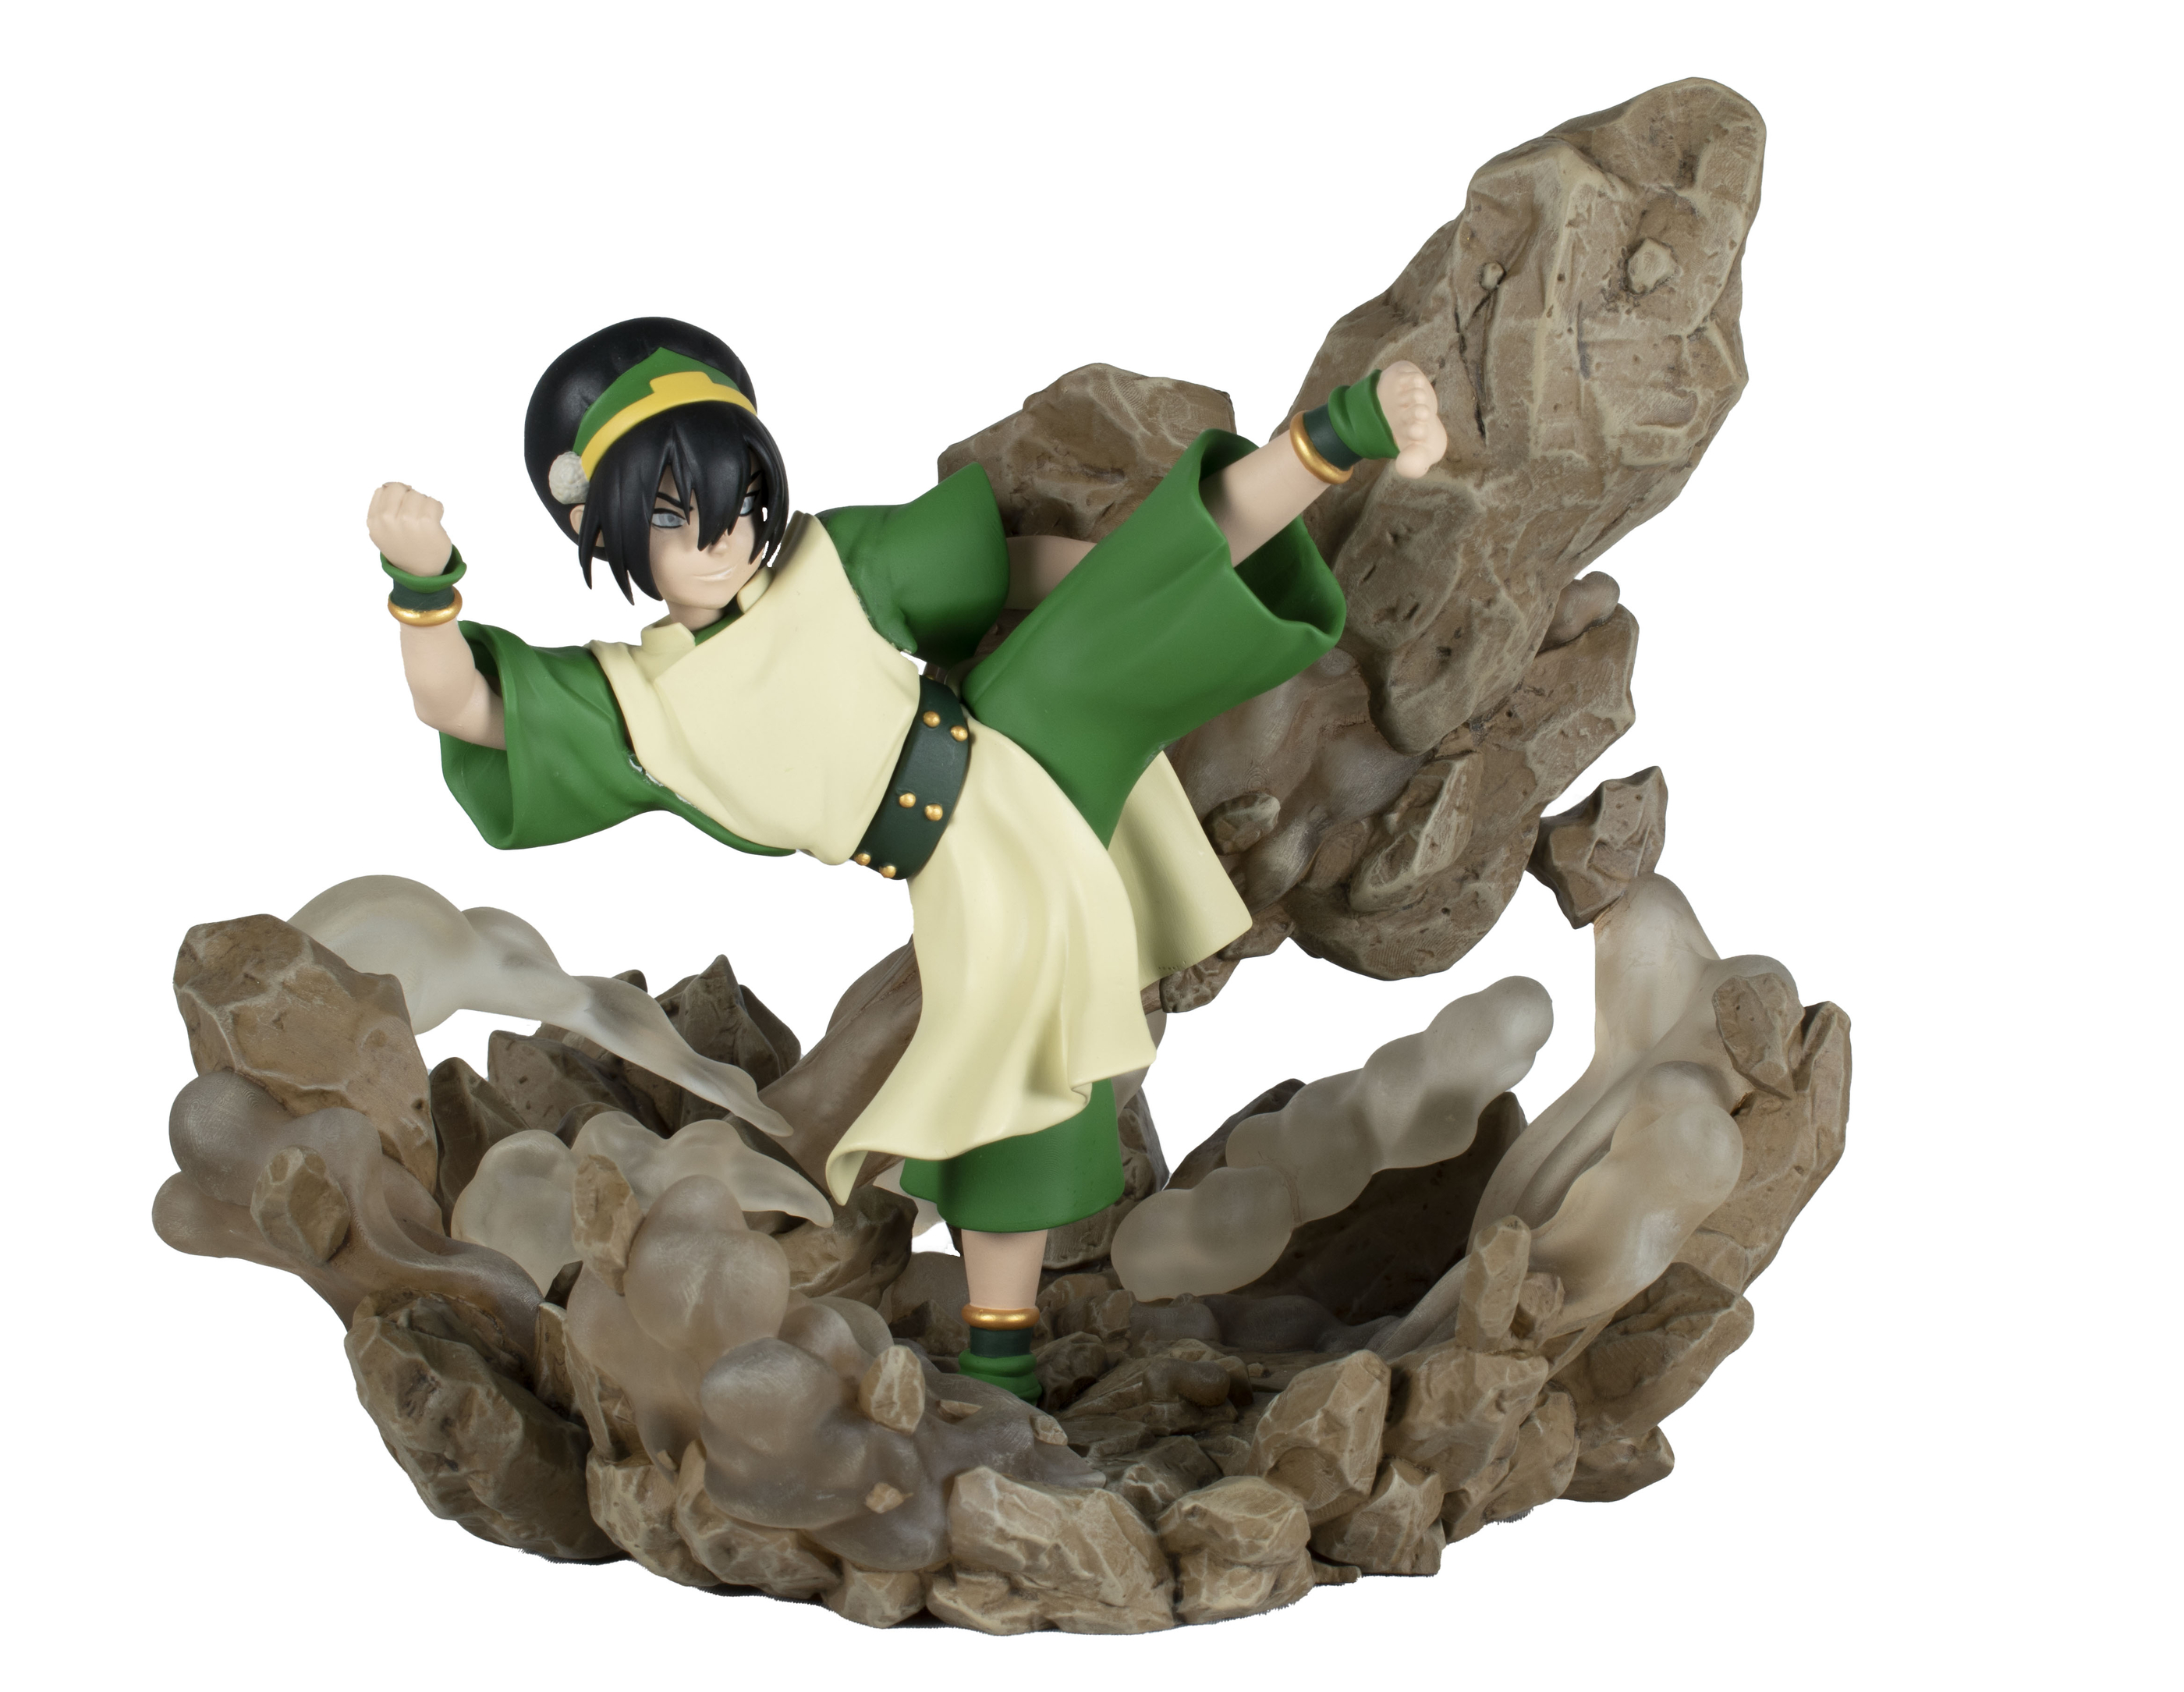 Avatar The Last Airbender Gallery Toph PVC Statue